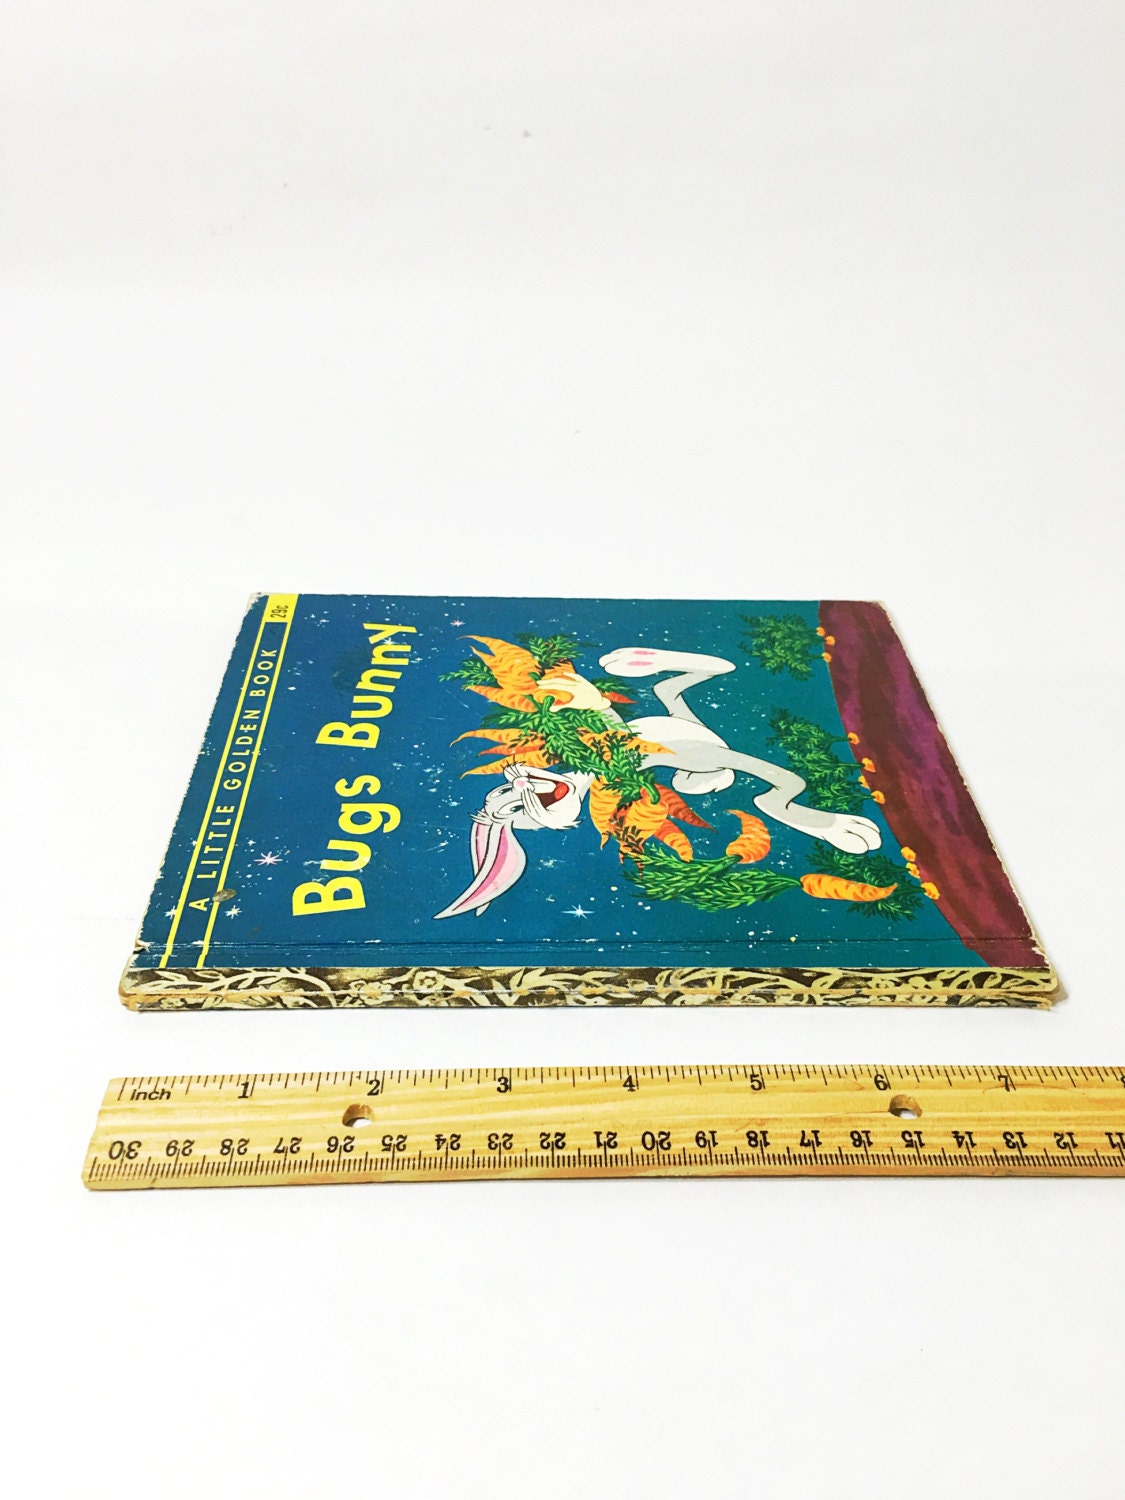 Bugs Bunny 1949 Little Golden Book. First Edition Vintage Hardback Book. Children's Stories. Mary Reed